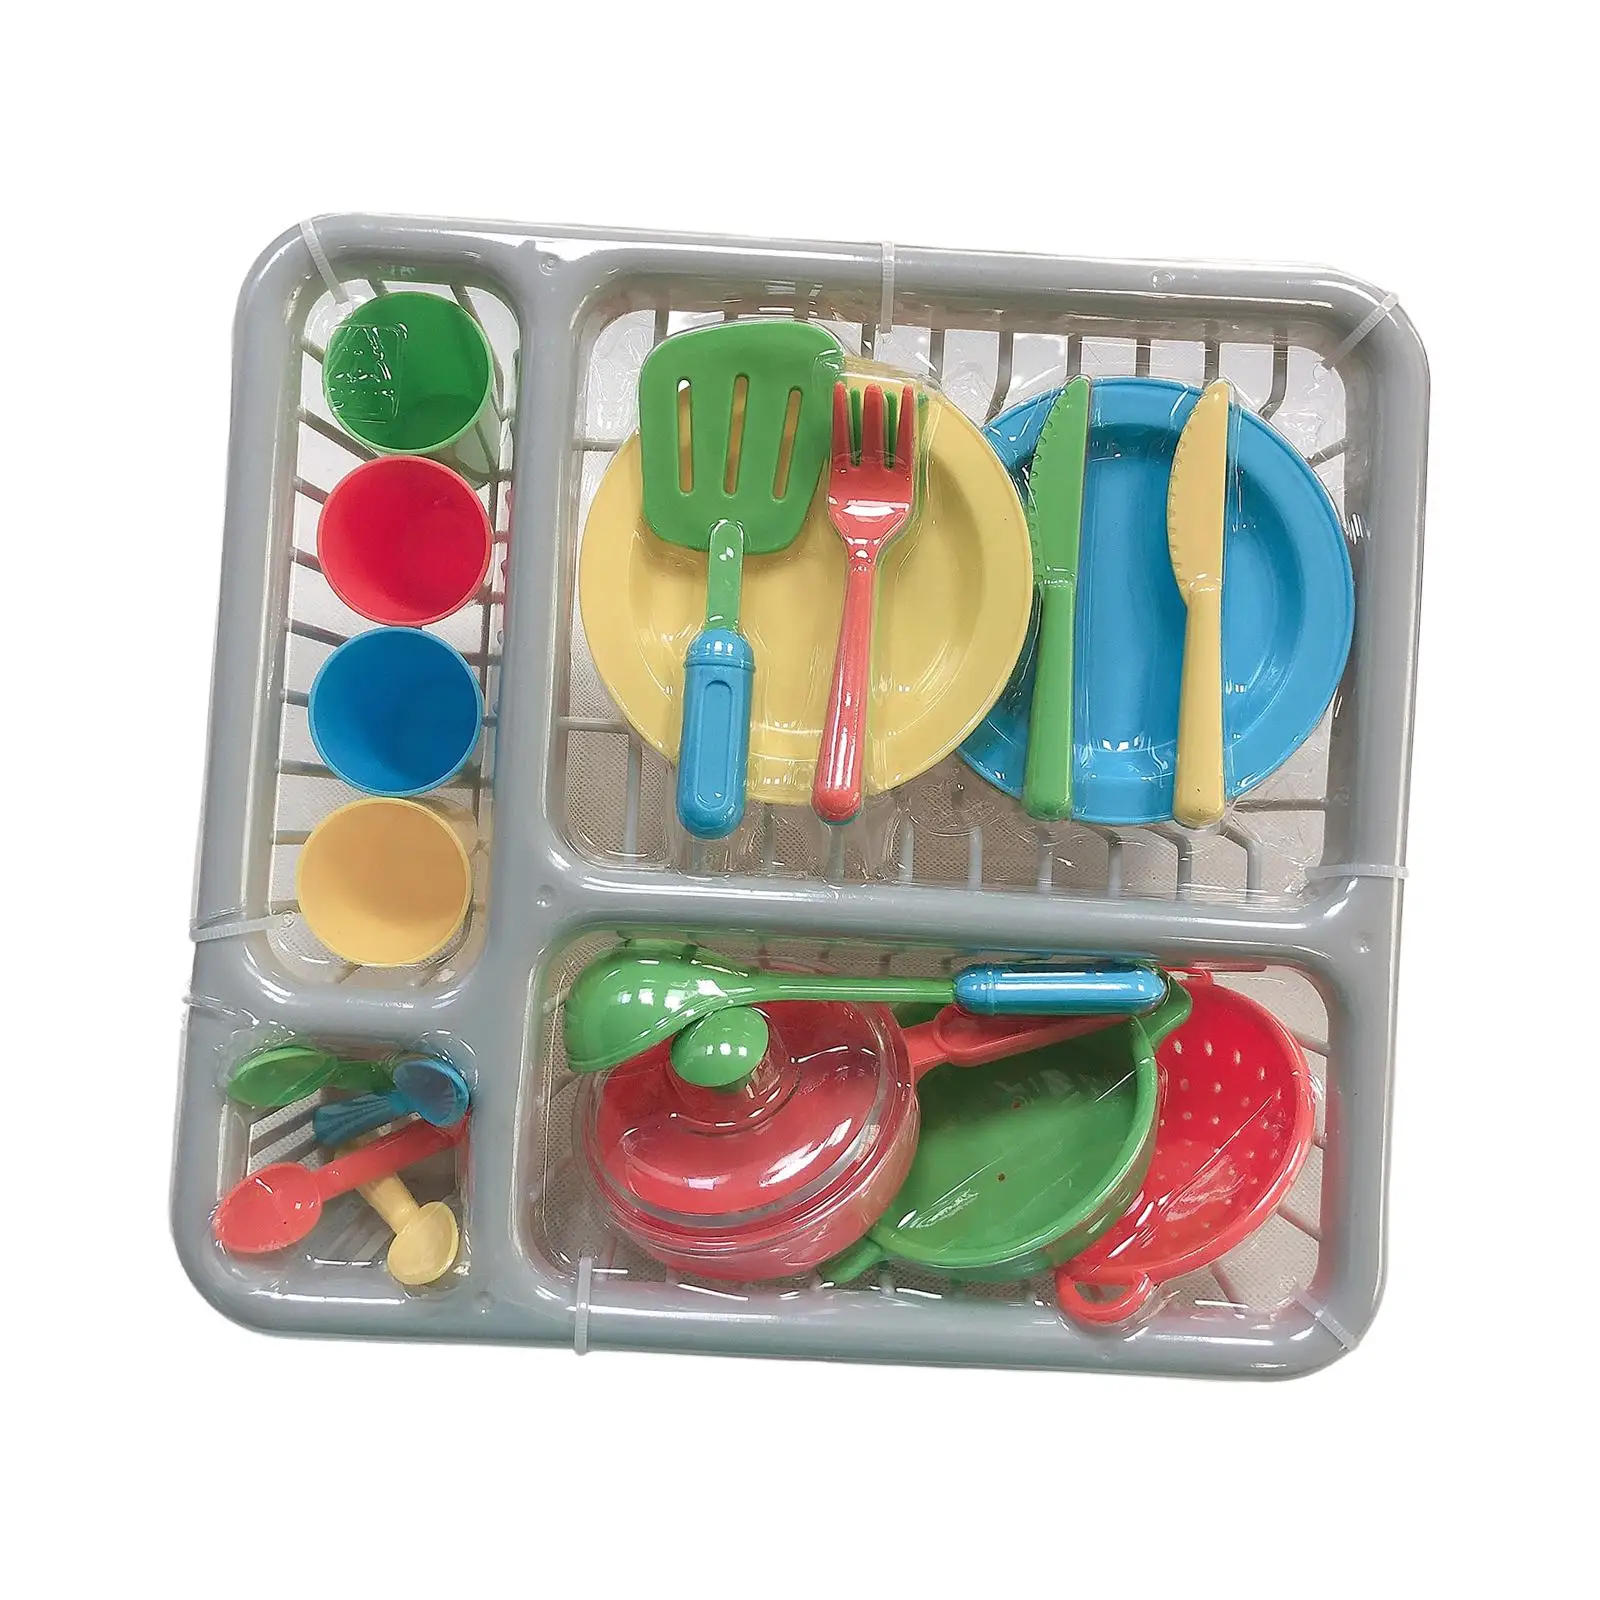 28Pcs Child Cookware Set Kids Toy Plates and Dishes for Kitchen Playset for Preschool Birthday Gift Party Favor Kids Boys Girls